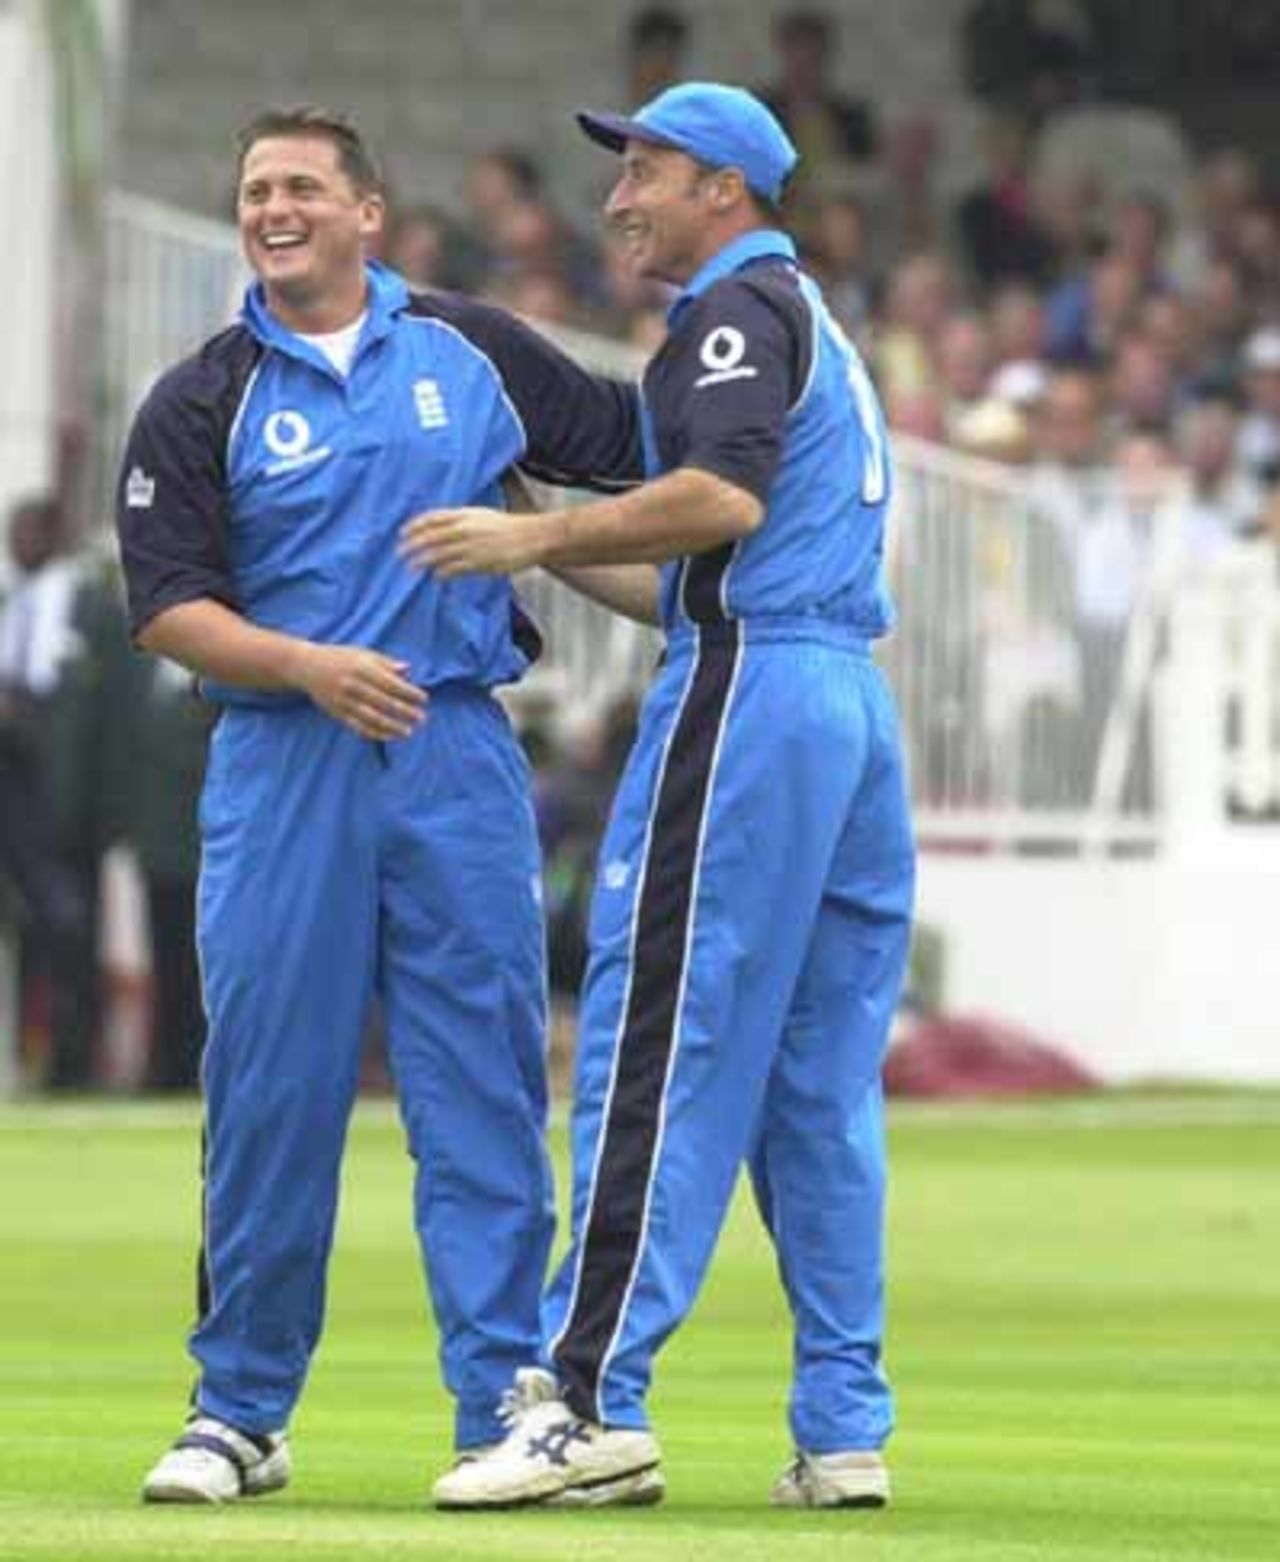 In the final of the NatWest ODI series, England v Zimbabwe, Lord's 2000